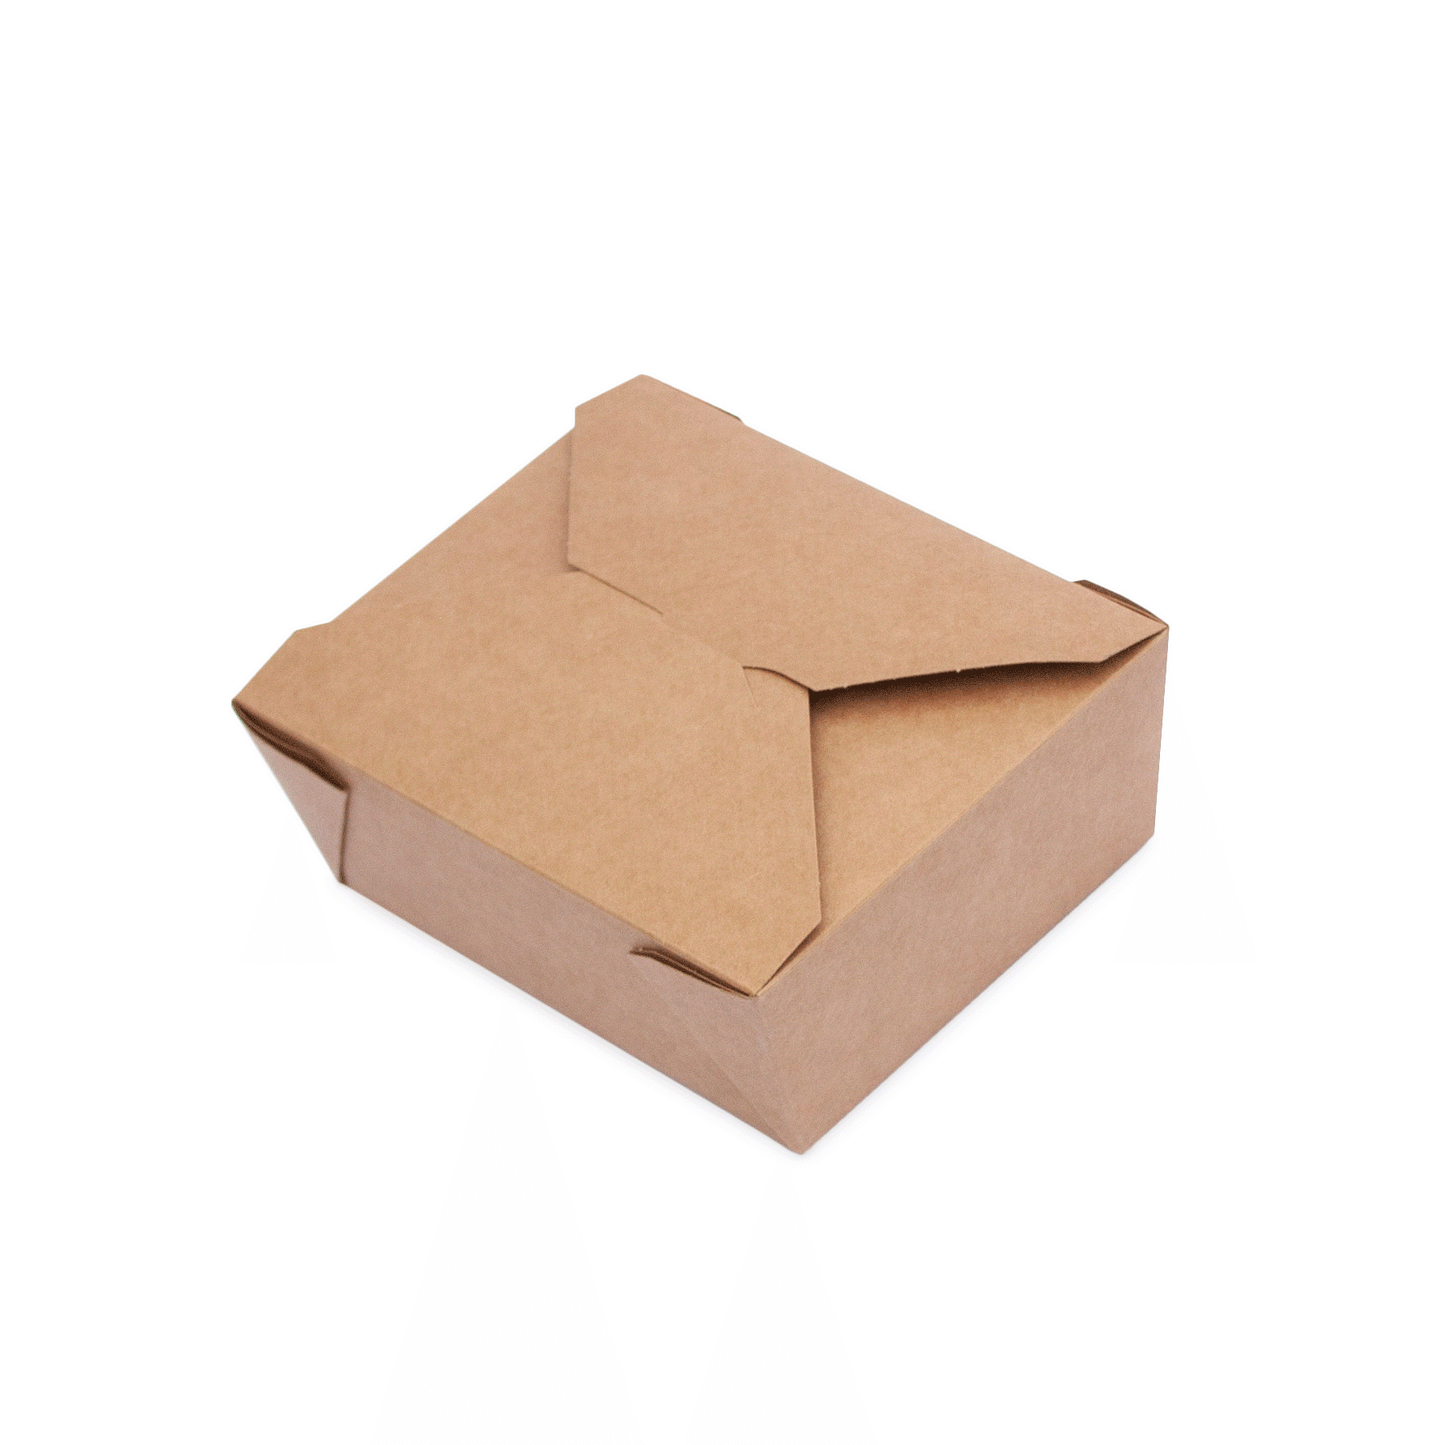 Leakproof food container No.4 kraft food-to-go carton 180 units,  2500ml (19.5 x 14 x 9cm)